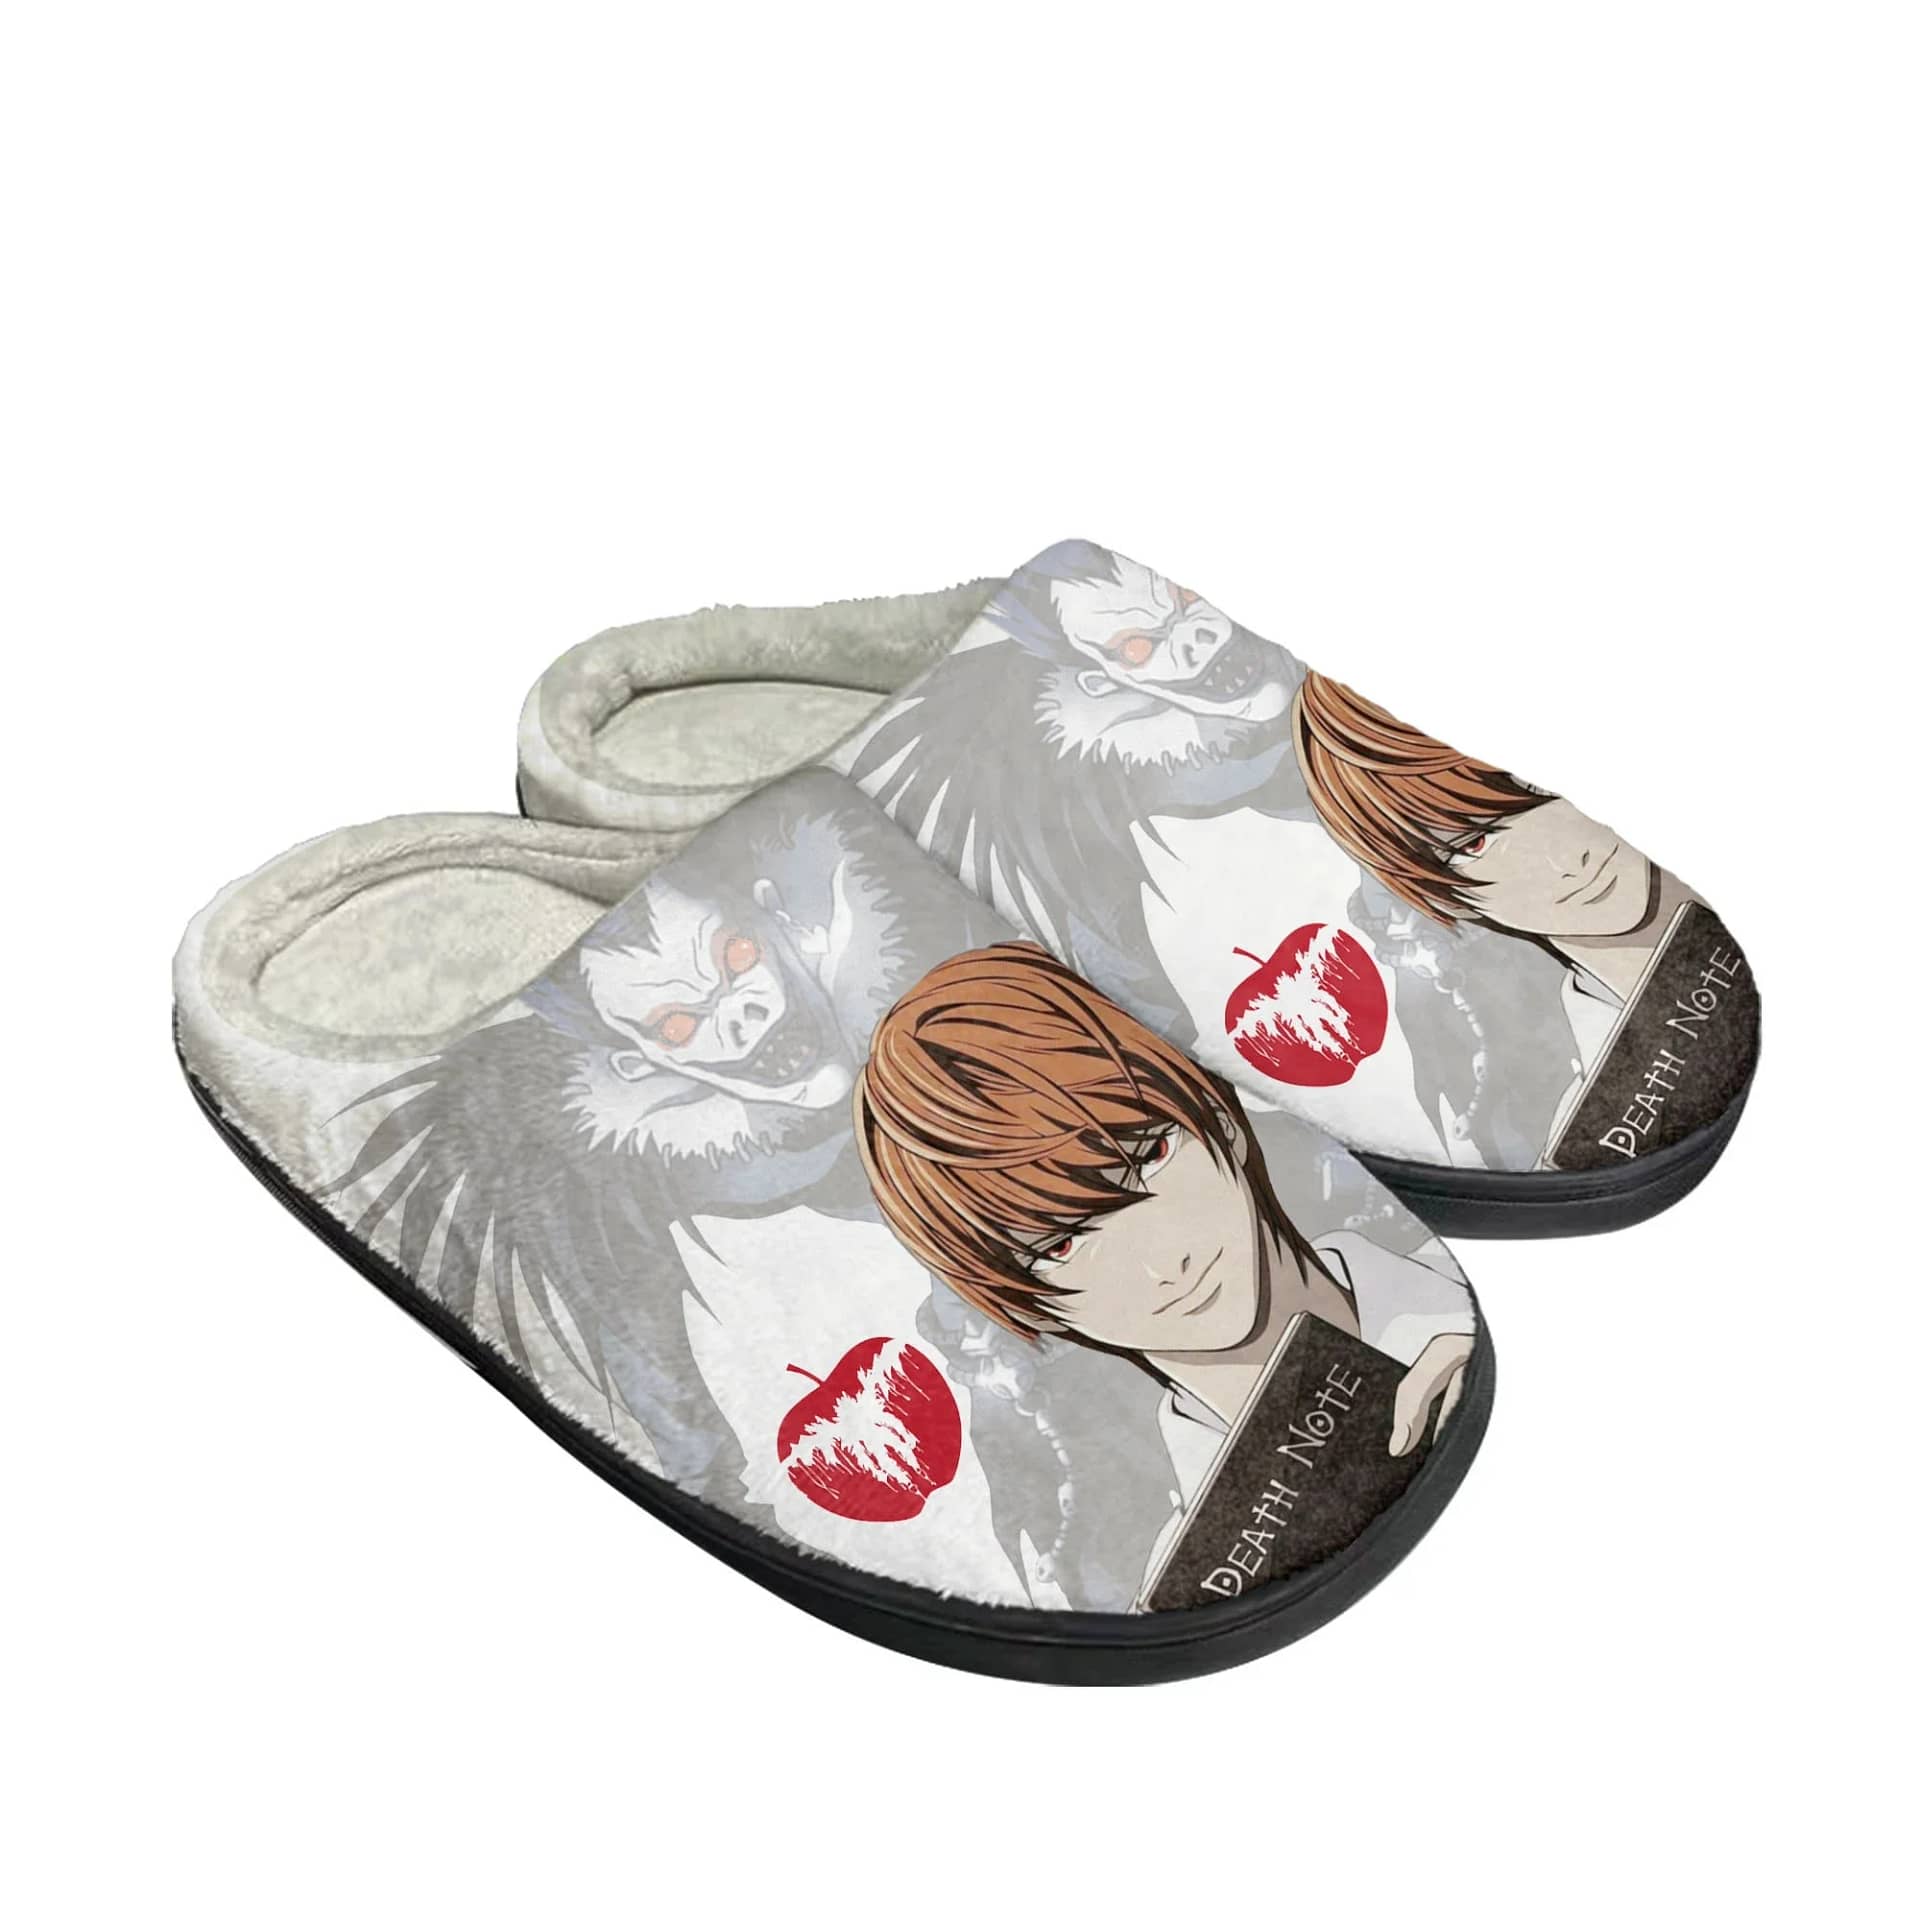 Anime Death Note Yagami Lawliet L Fashion Custom Shoes Slippers